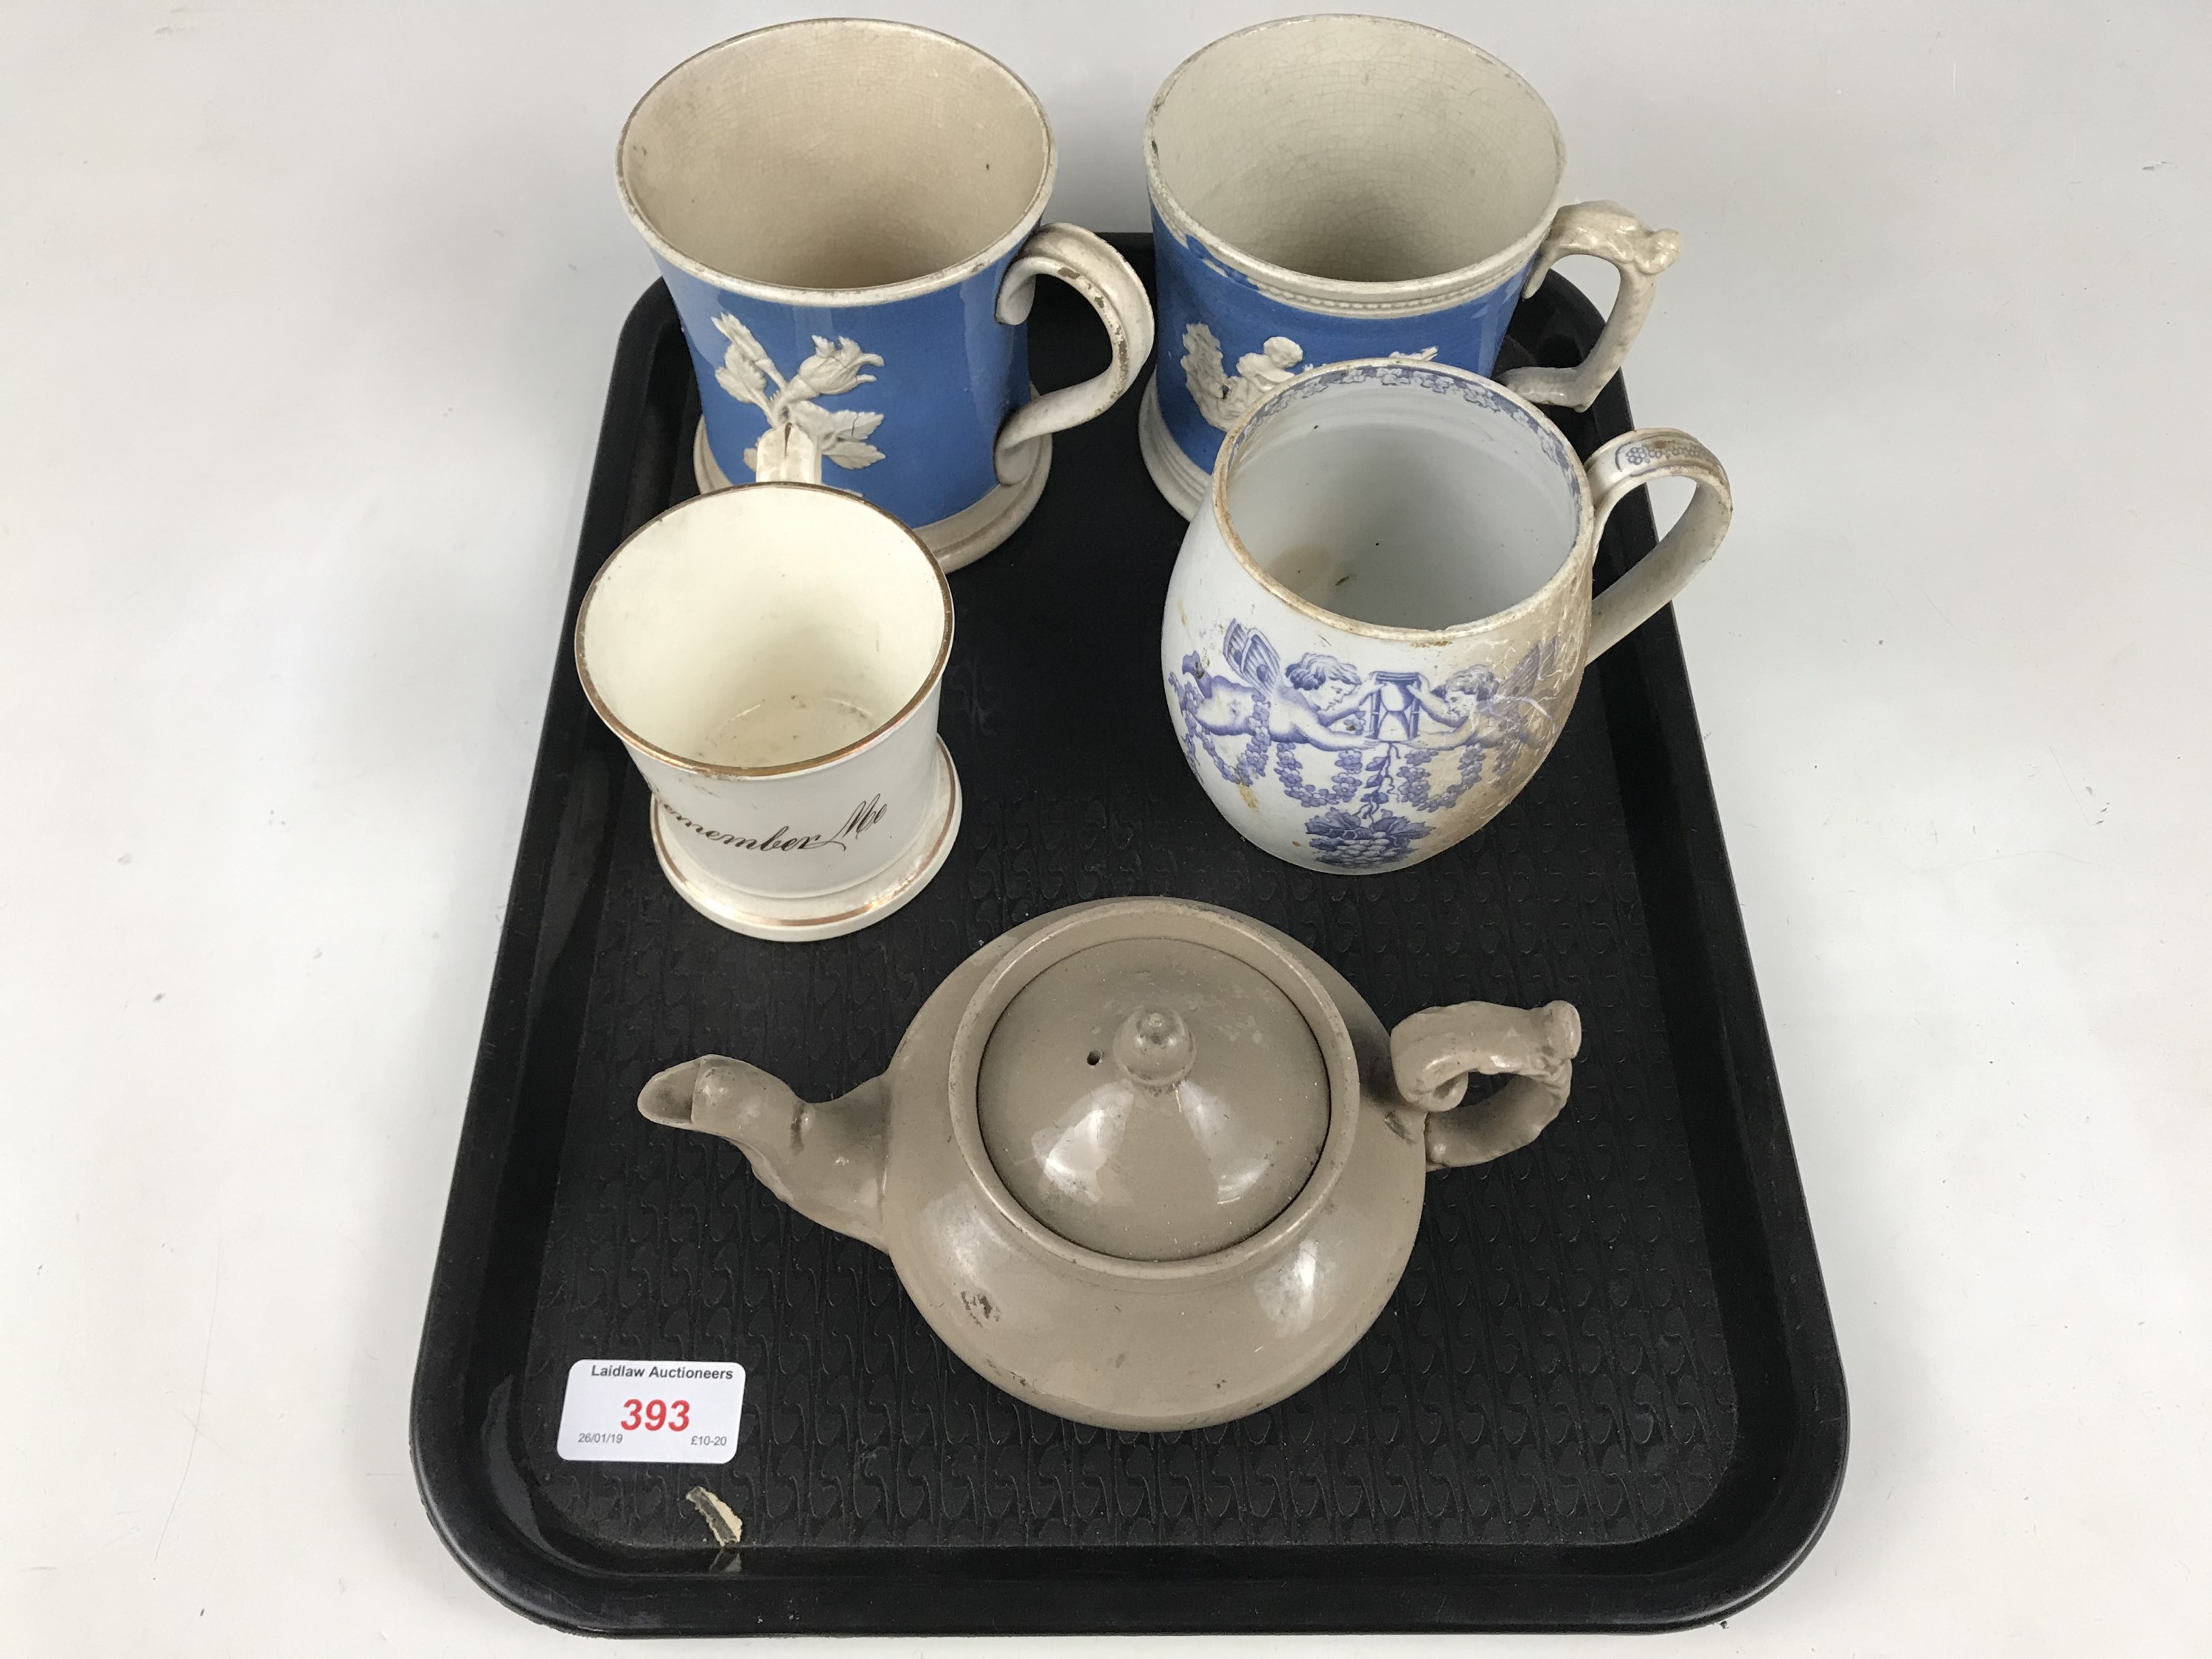 Two blue-and-white tankards together with a Cupids pattern mug (a/f), a Victorian Remember Me mug